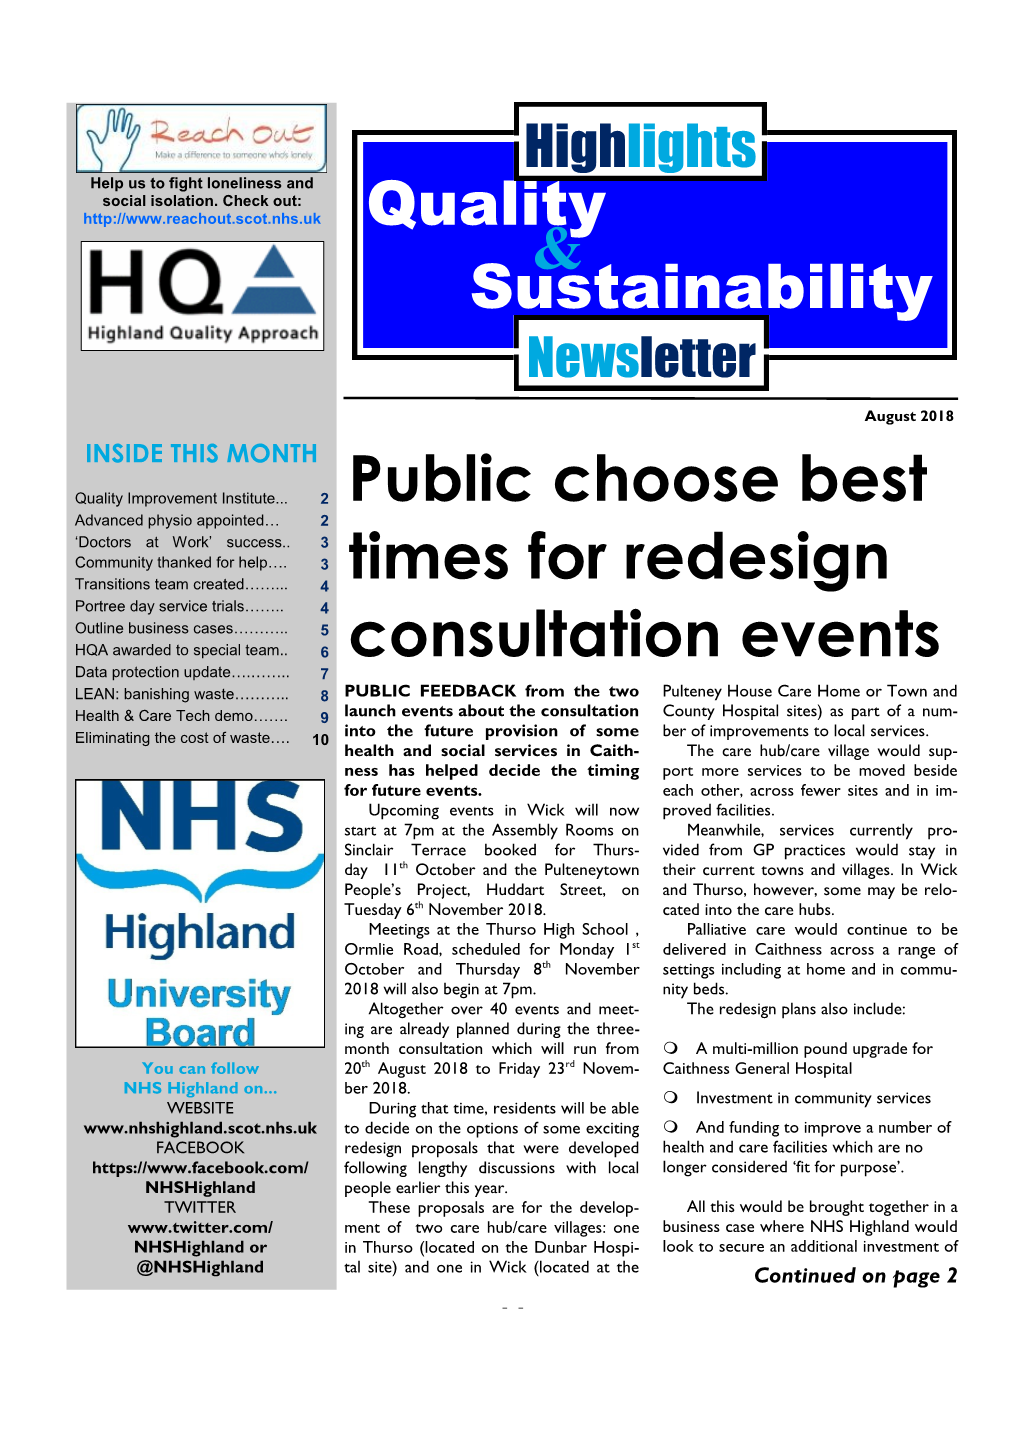 Public Choose Best Times for Redesign Consultation Events